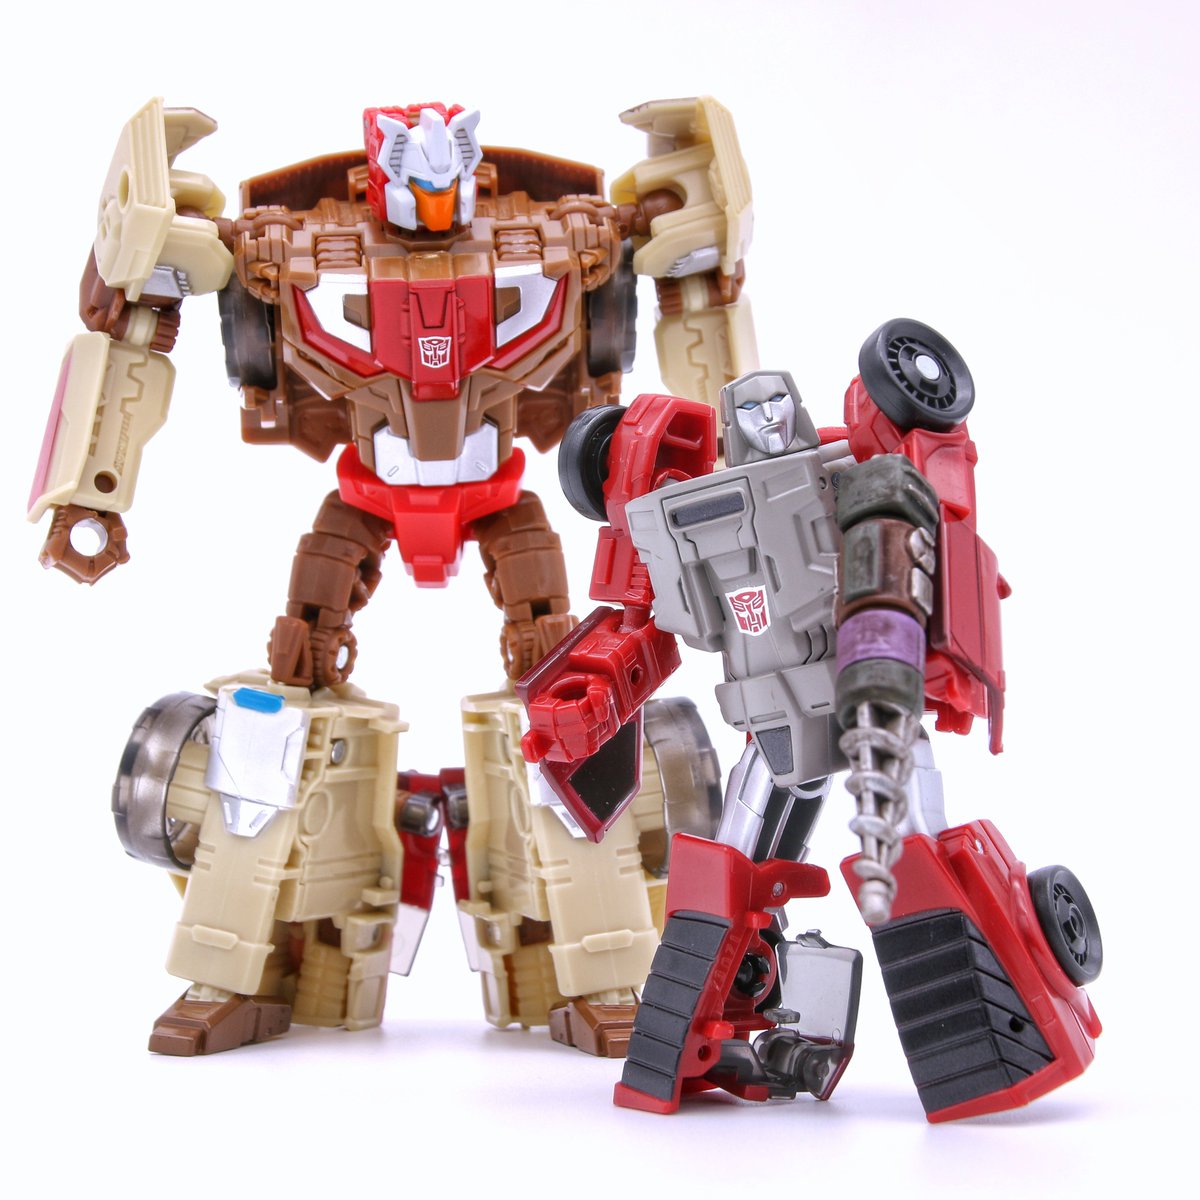 Windcharger and Chromedome! #transformers #toyphotography